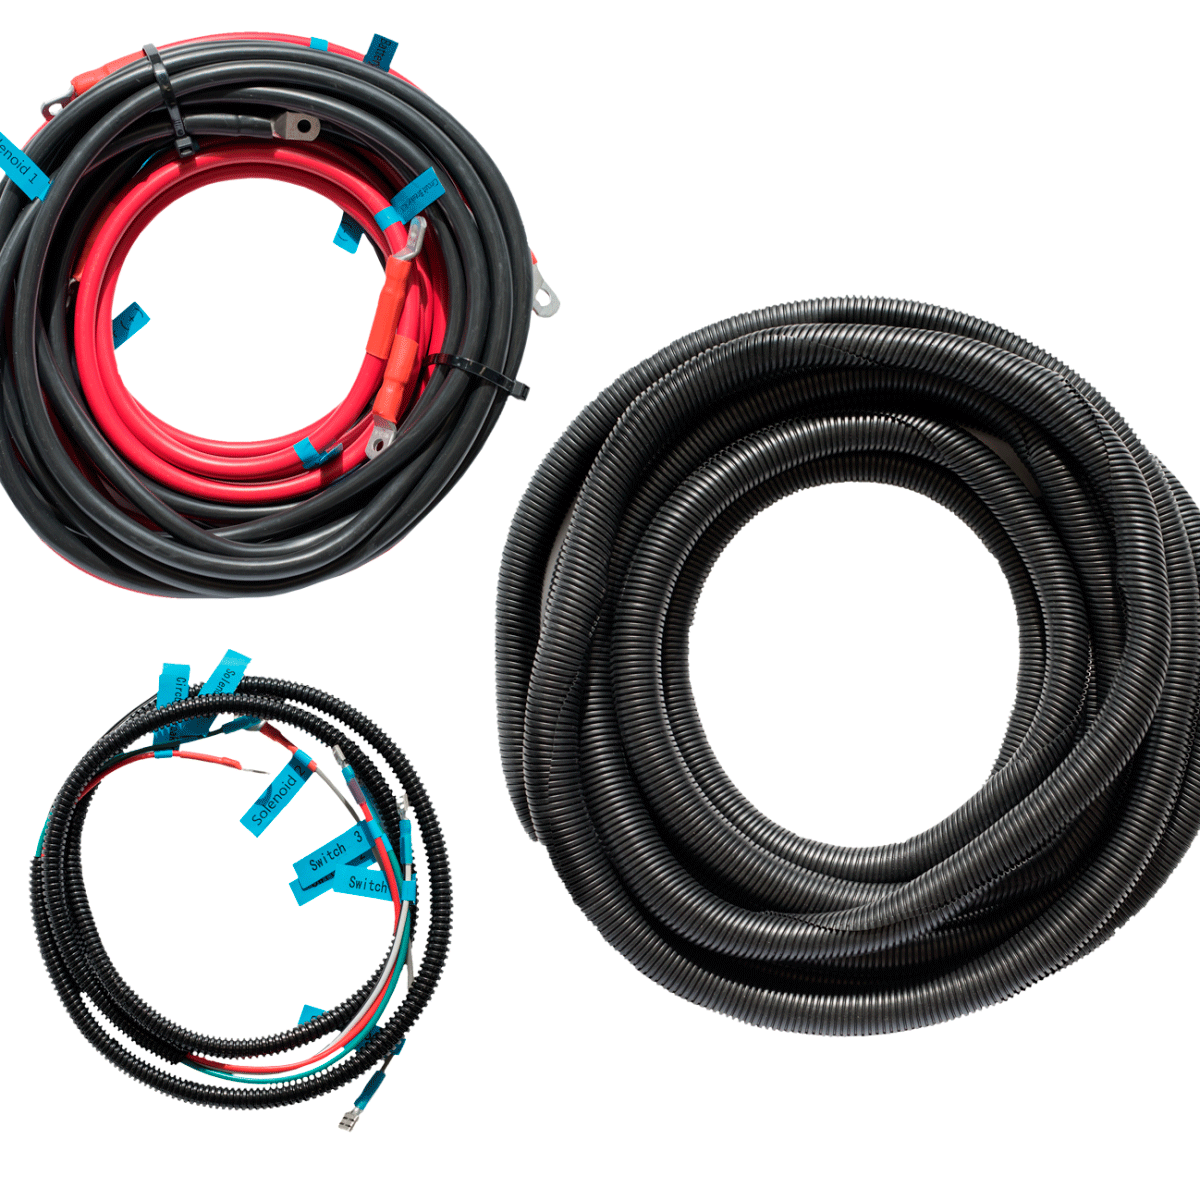 VIPER WIRING LOOM for boats up to 6m